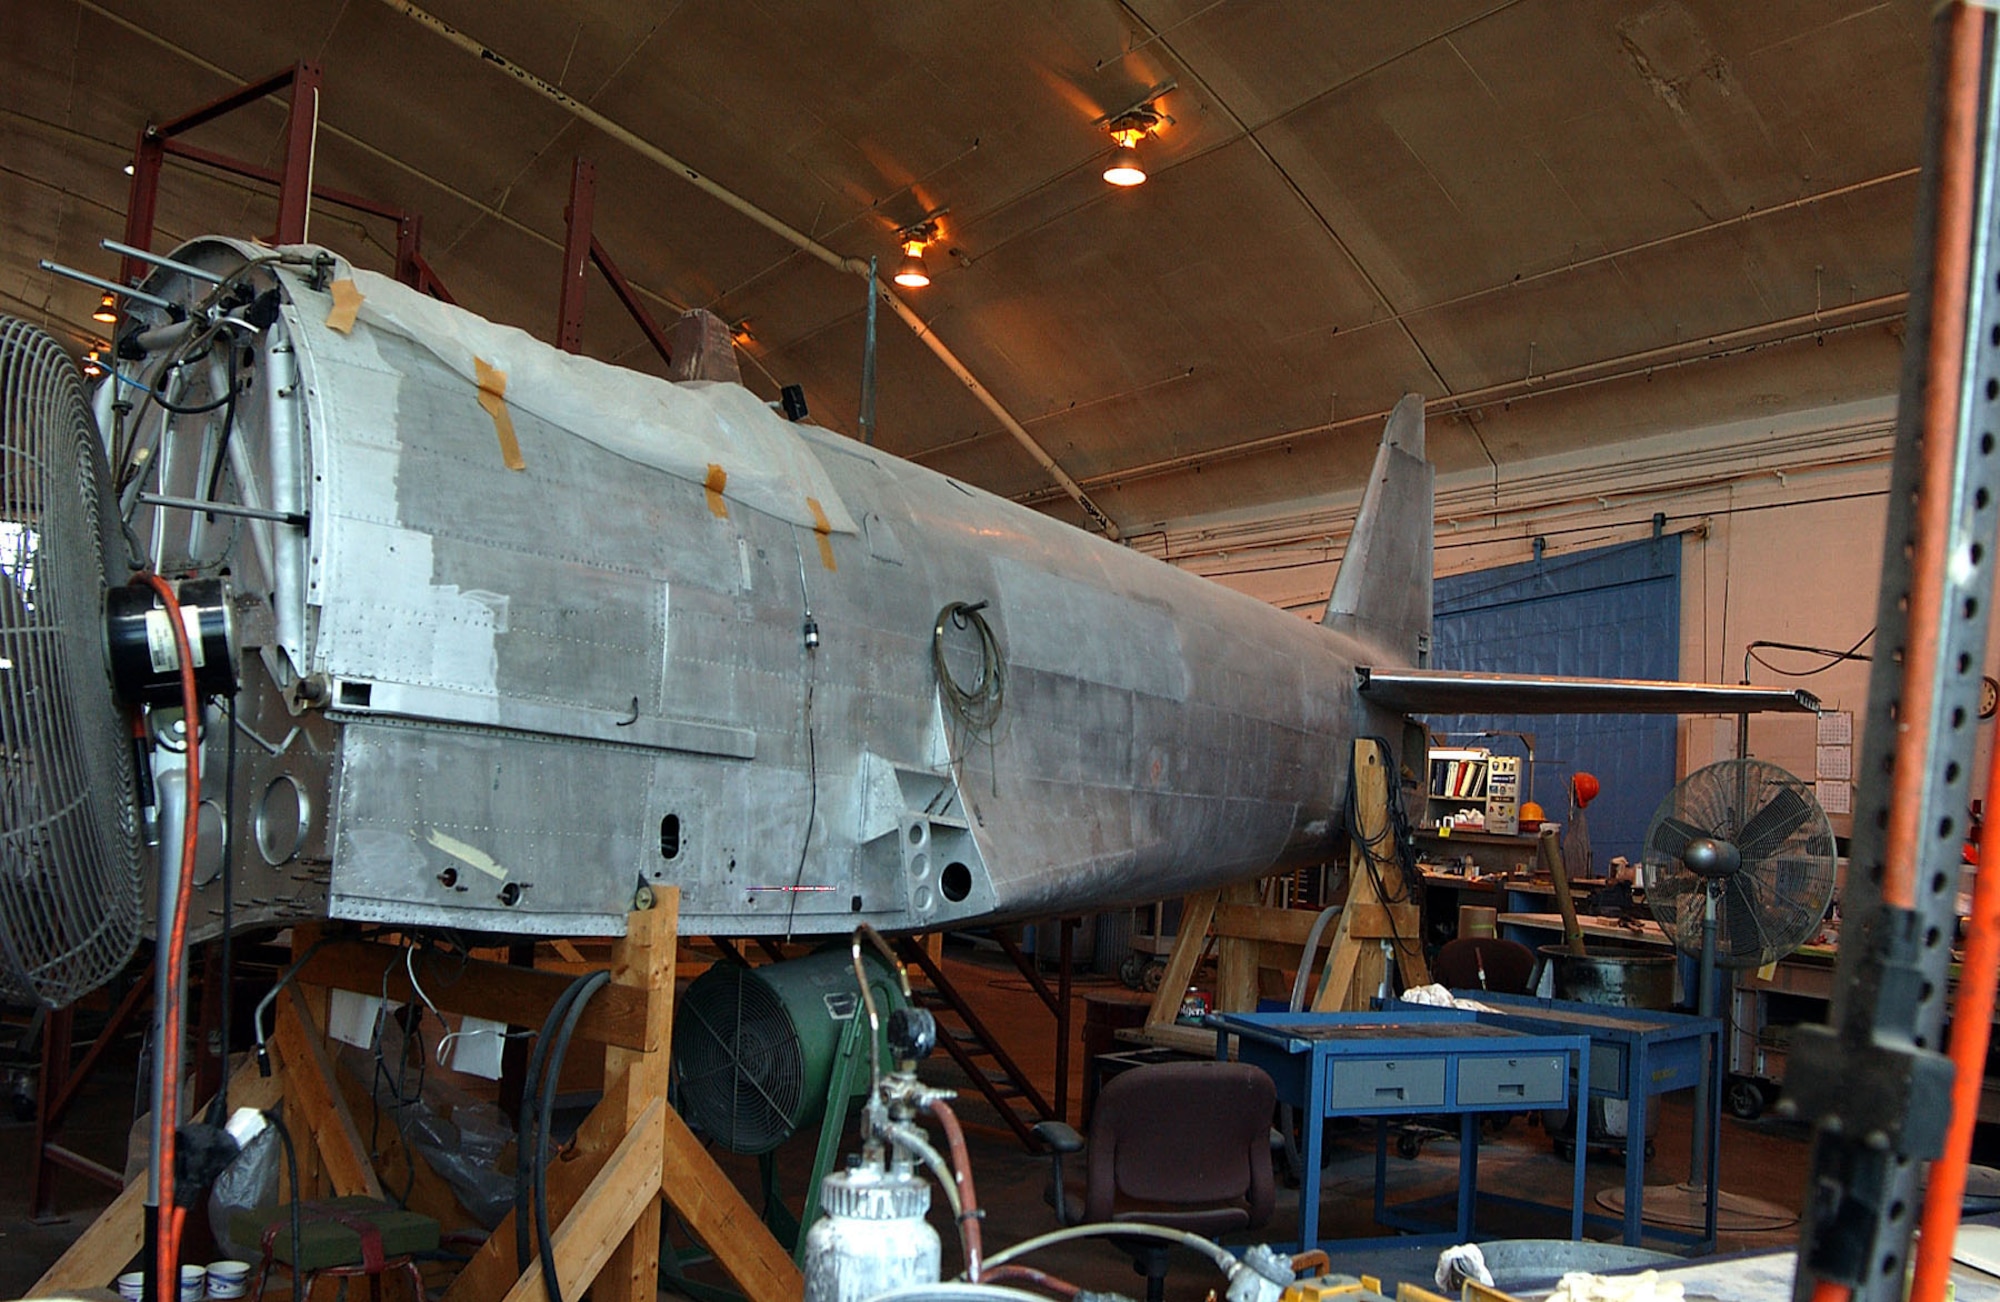 DAYTON, Ohio (07/2005) -- The Kawanishi N1K2-Ja (or George), a World War II Japanese air defense fighter, undergoes restoration at the National Museum of the United States Air Force. (U.S. Air Force photo)